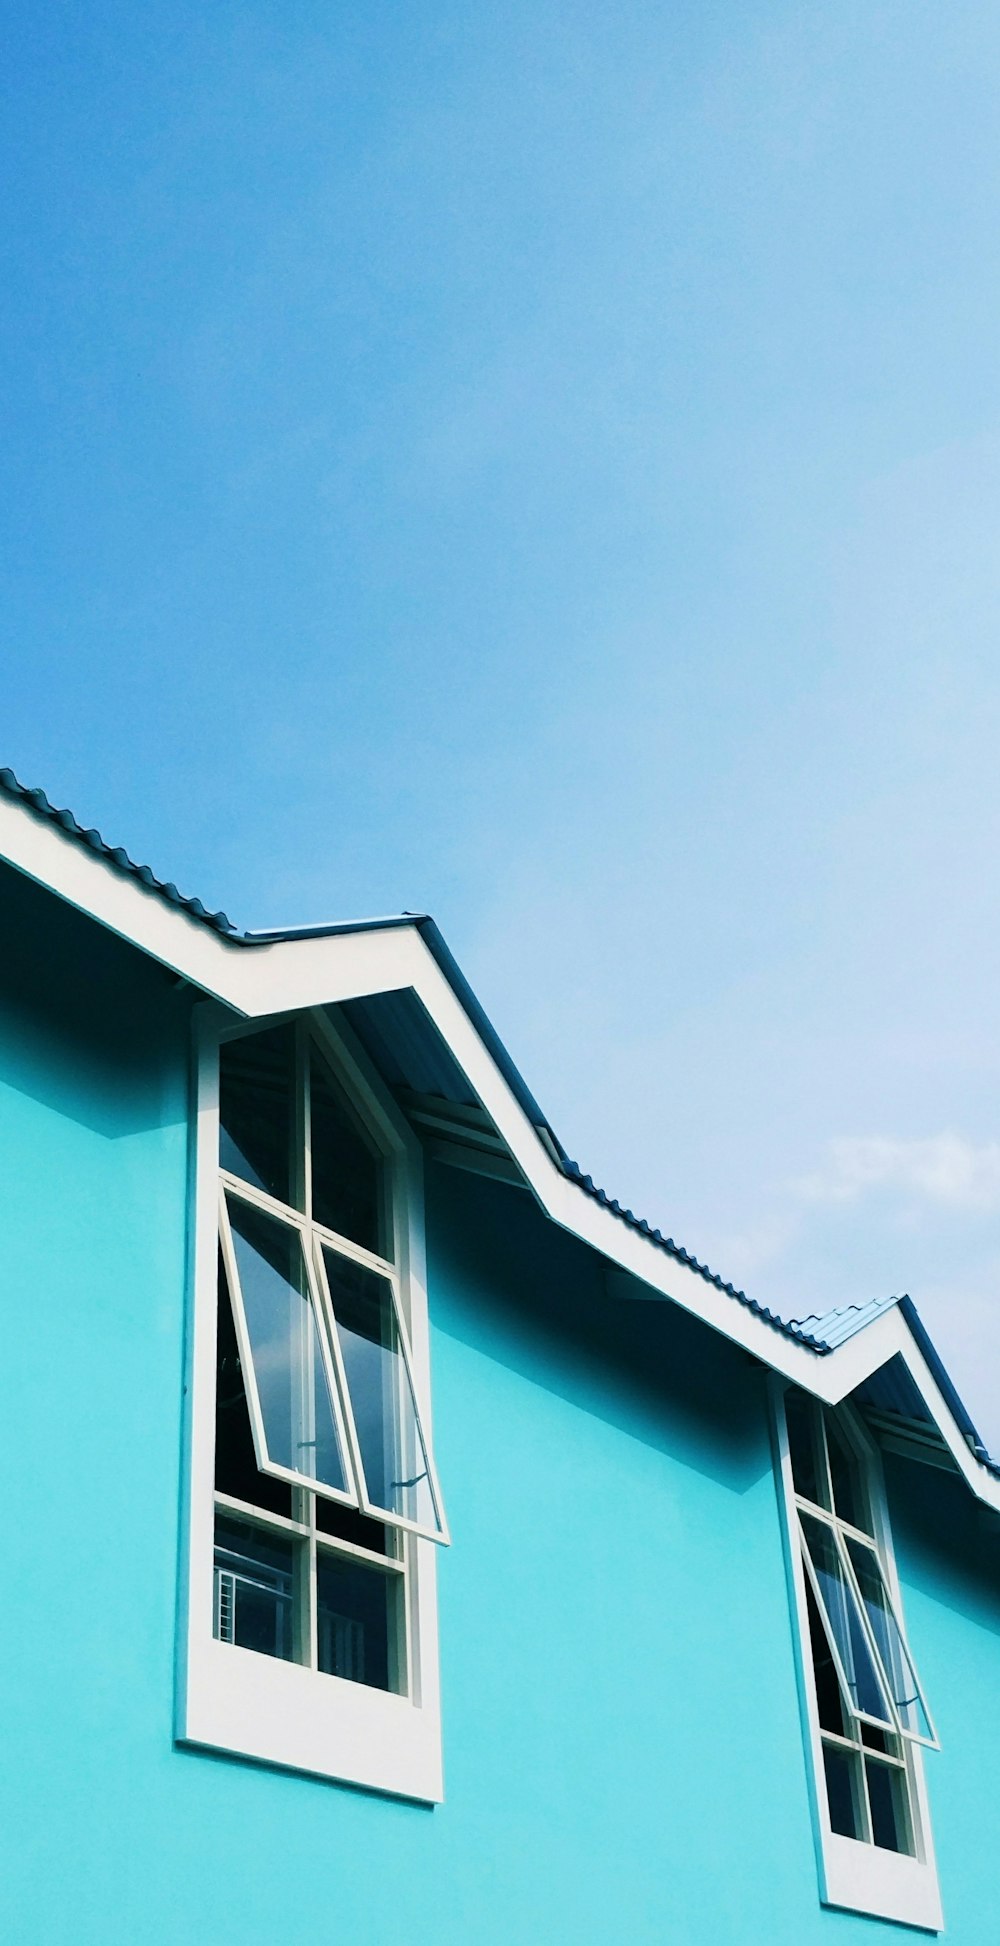 view photography of blue concrete house